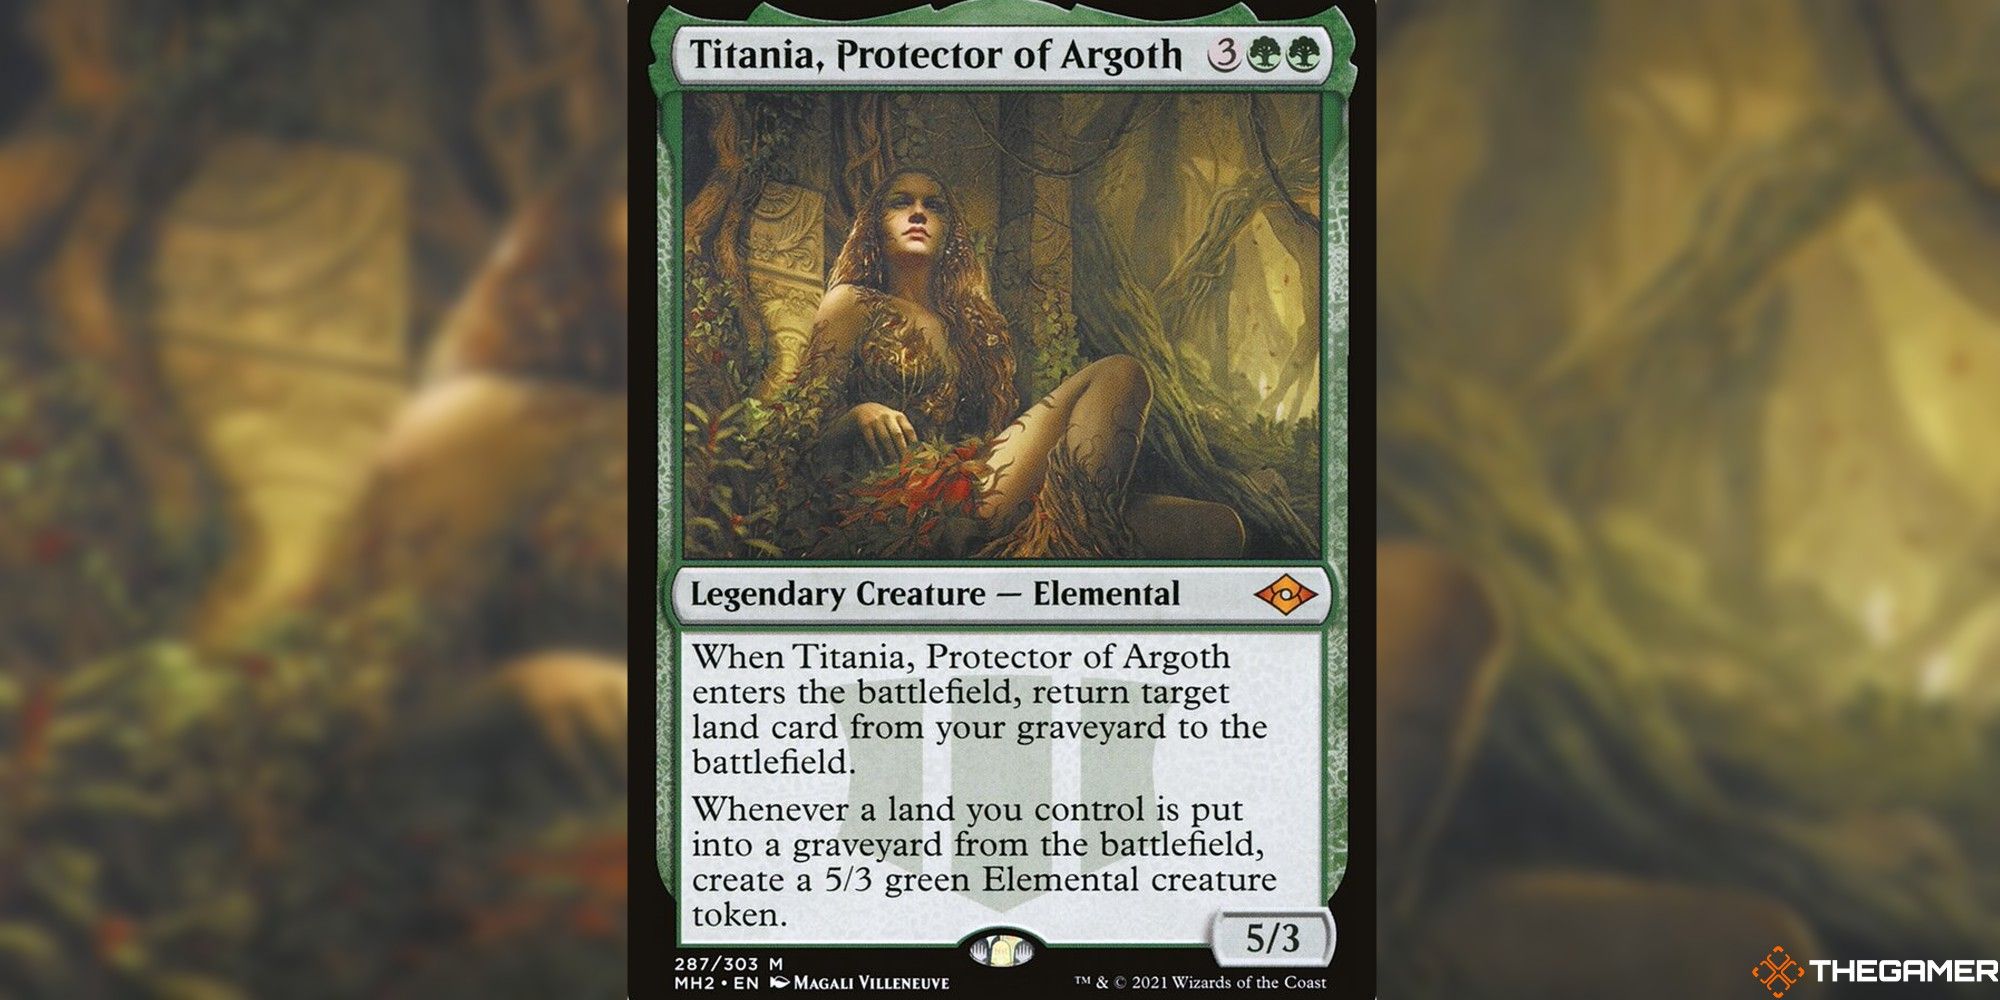 mtg titania, protector of argoth full card and art background